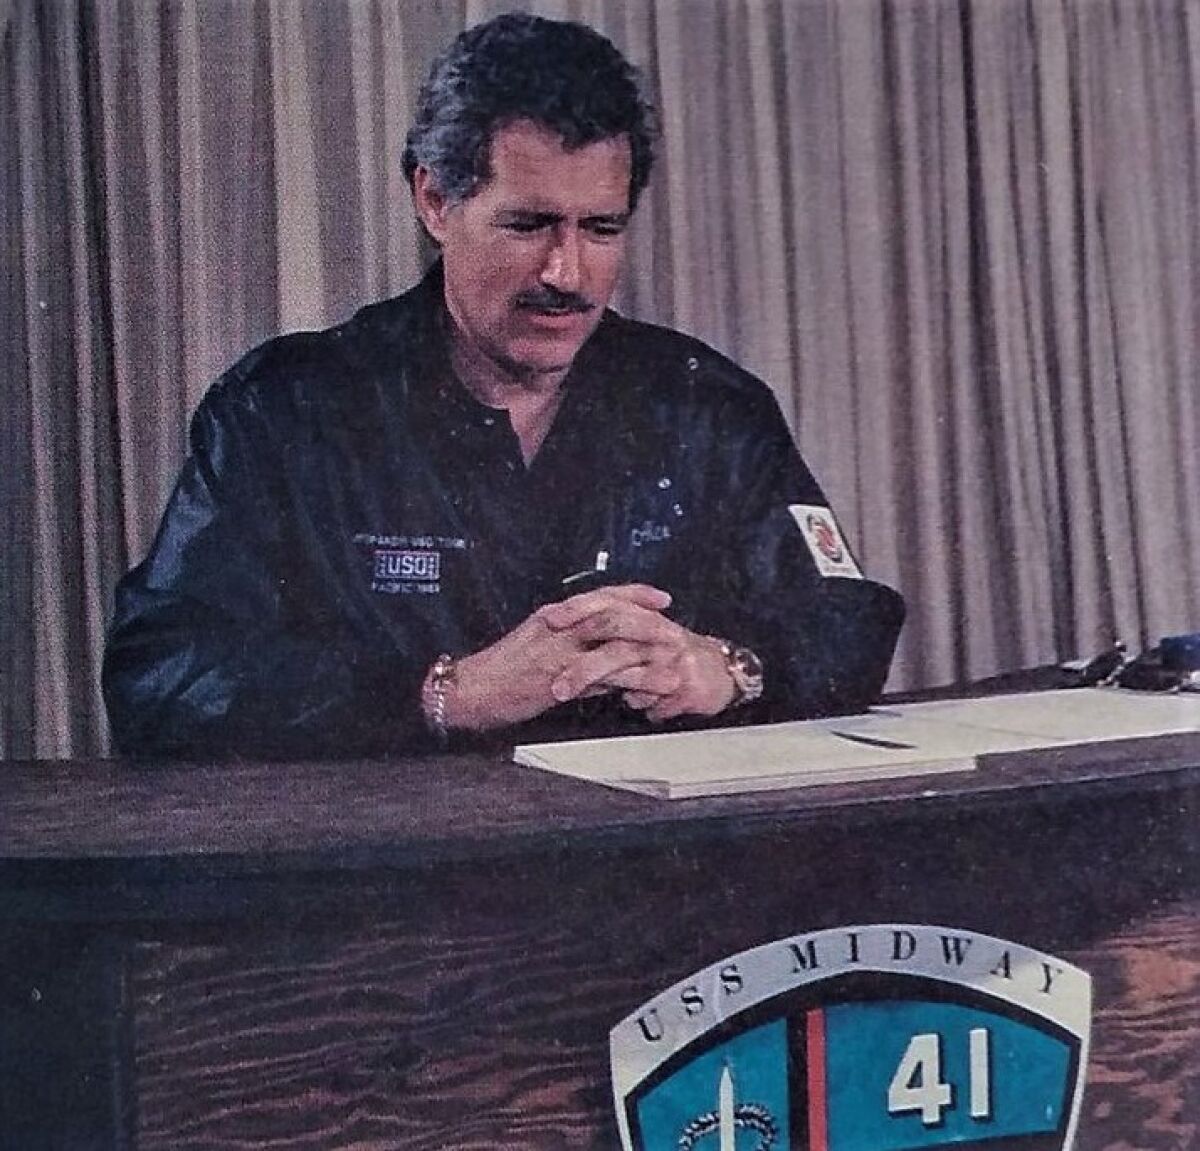 A young Alex Trebek aboard the U.S.S. Midway aircraft carrier while on a USO tour in 1988.